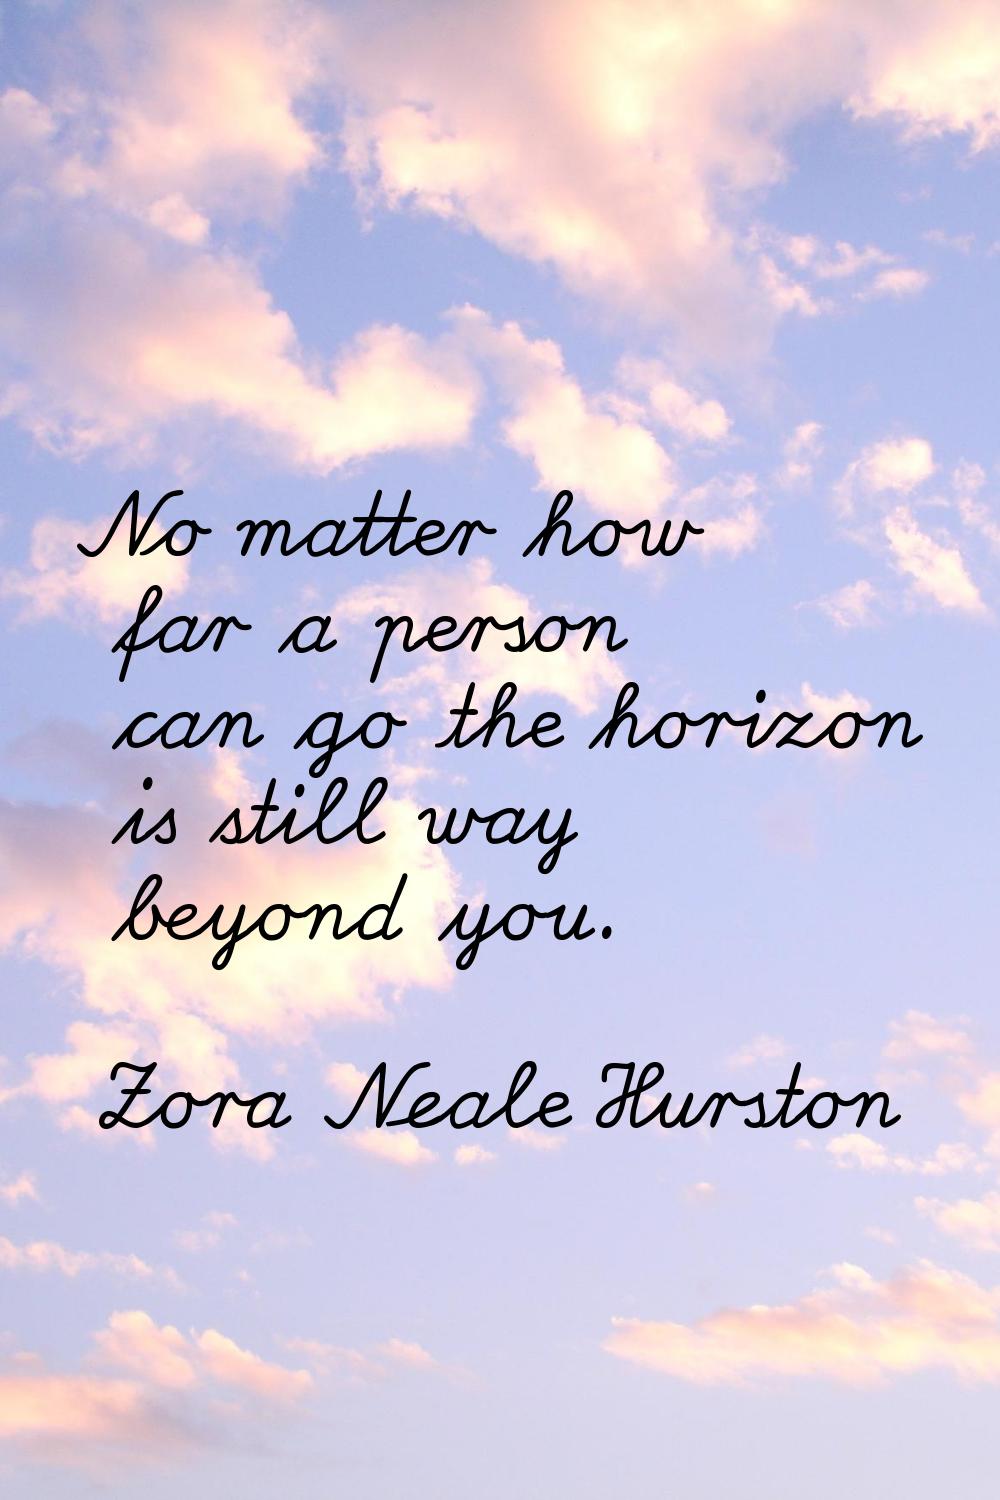 No matter how far a person can go the horizon is still way beyond you.